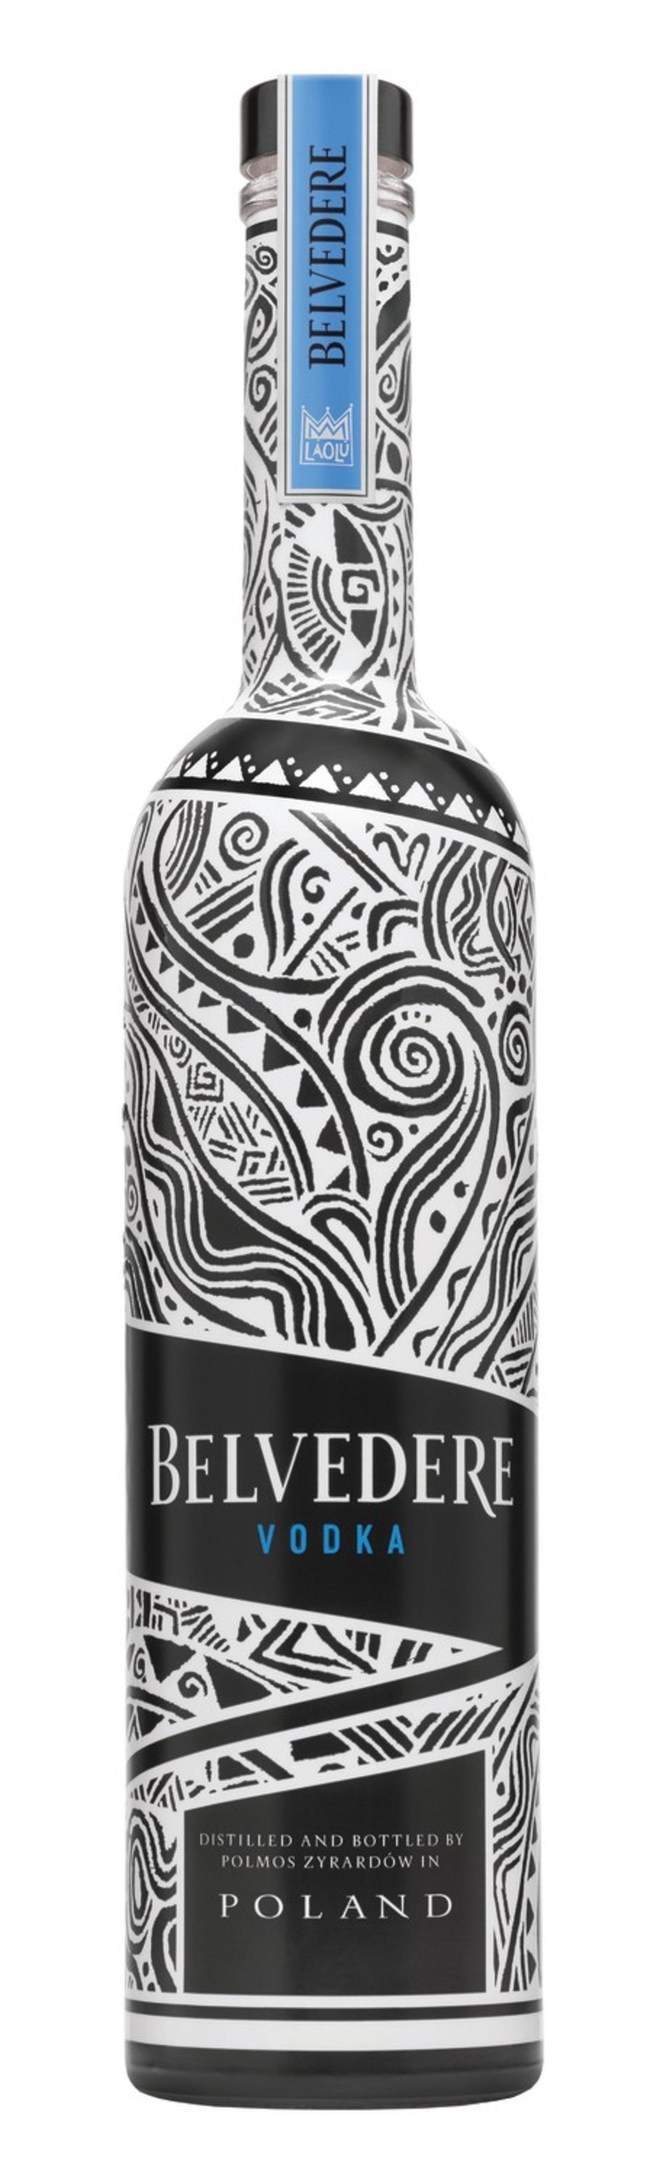 Belvedere Vodka unveils new bottle with full wrap sleeve